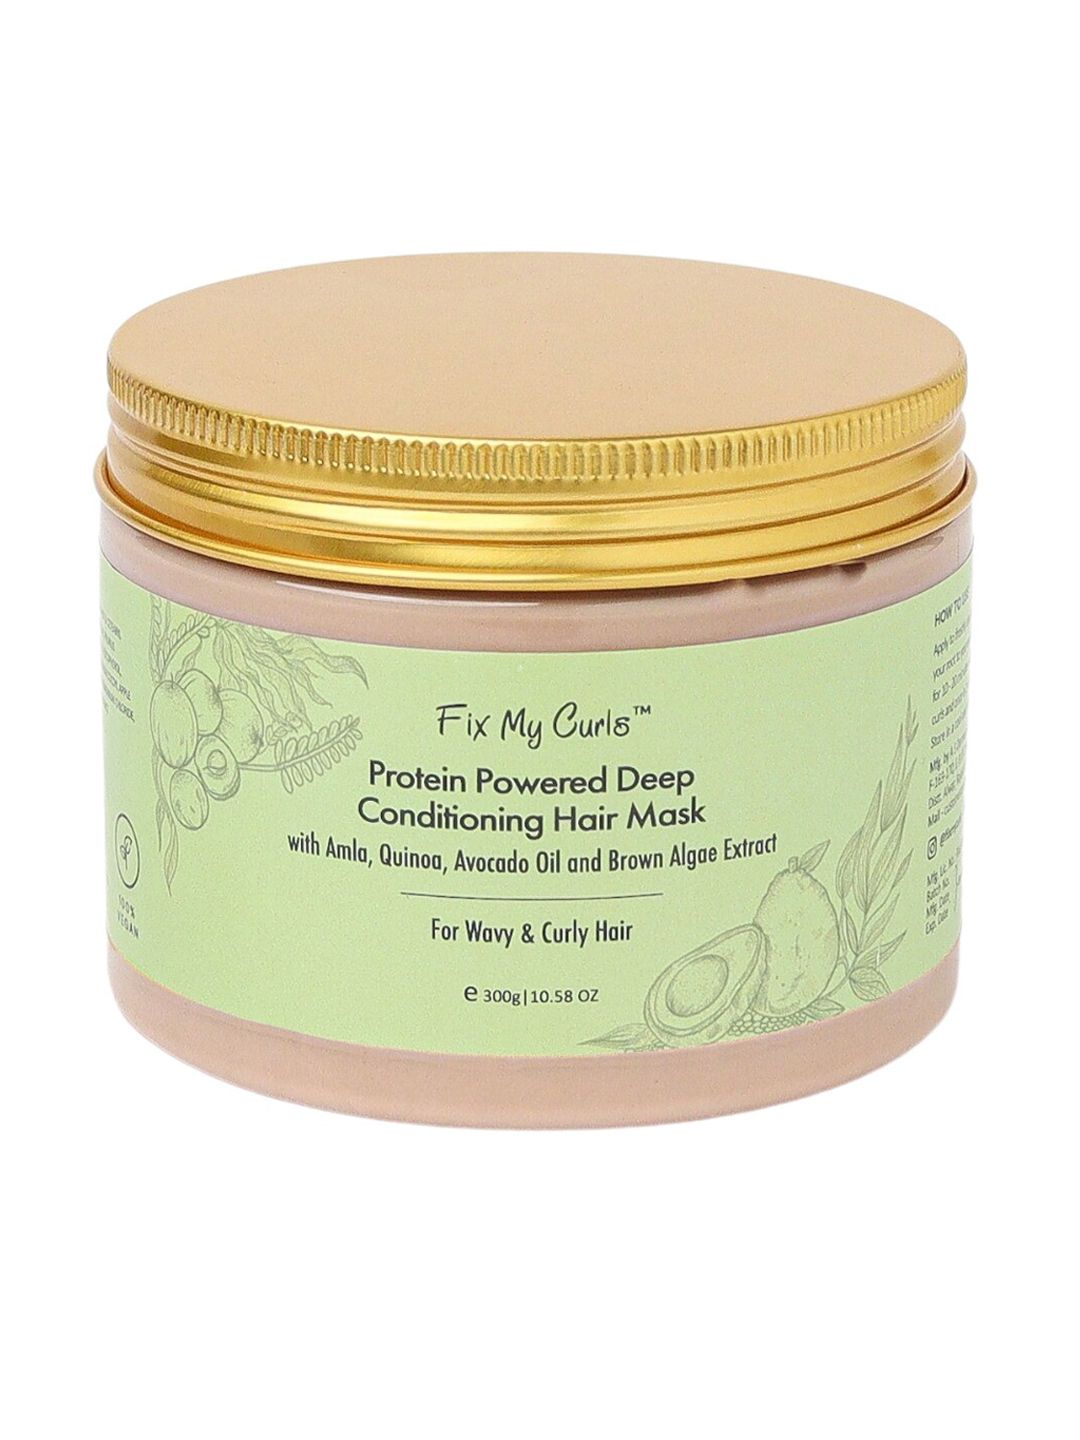 Fix My Curls Protein Powered Deep Conditioning Mask -300ml Price in India